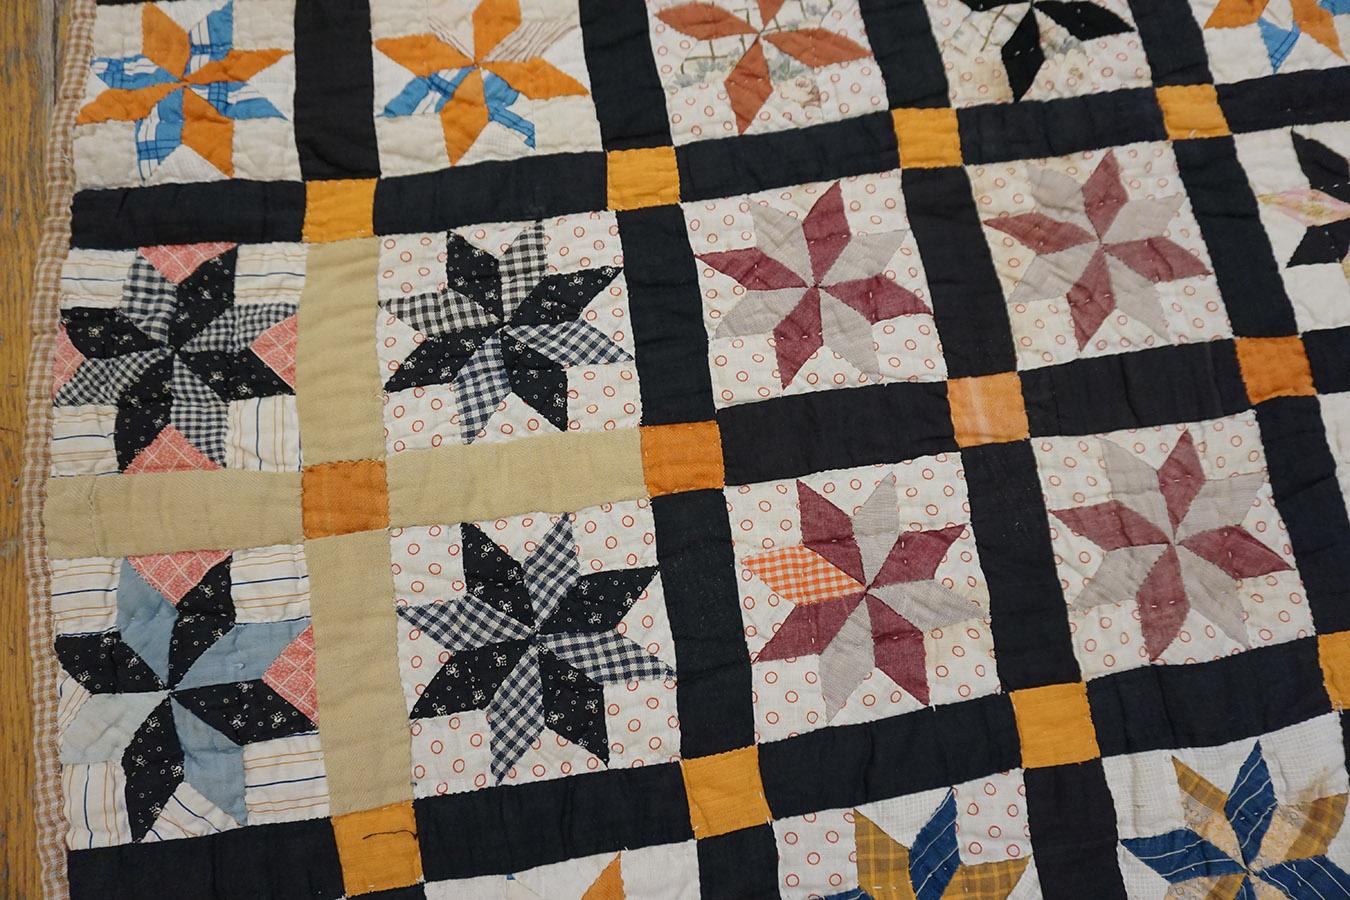 Early 20th Century American Quilt ( 5'3